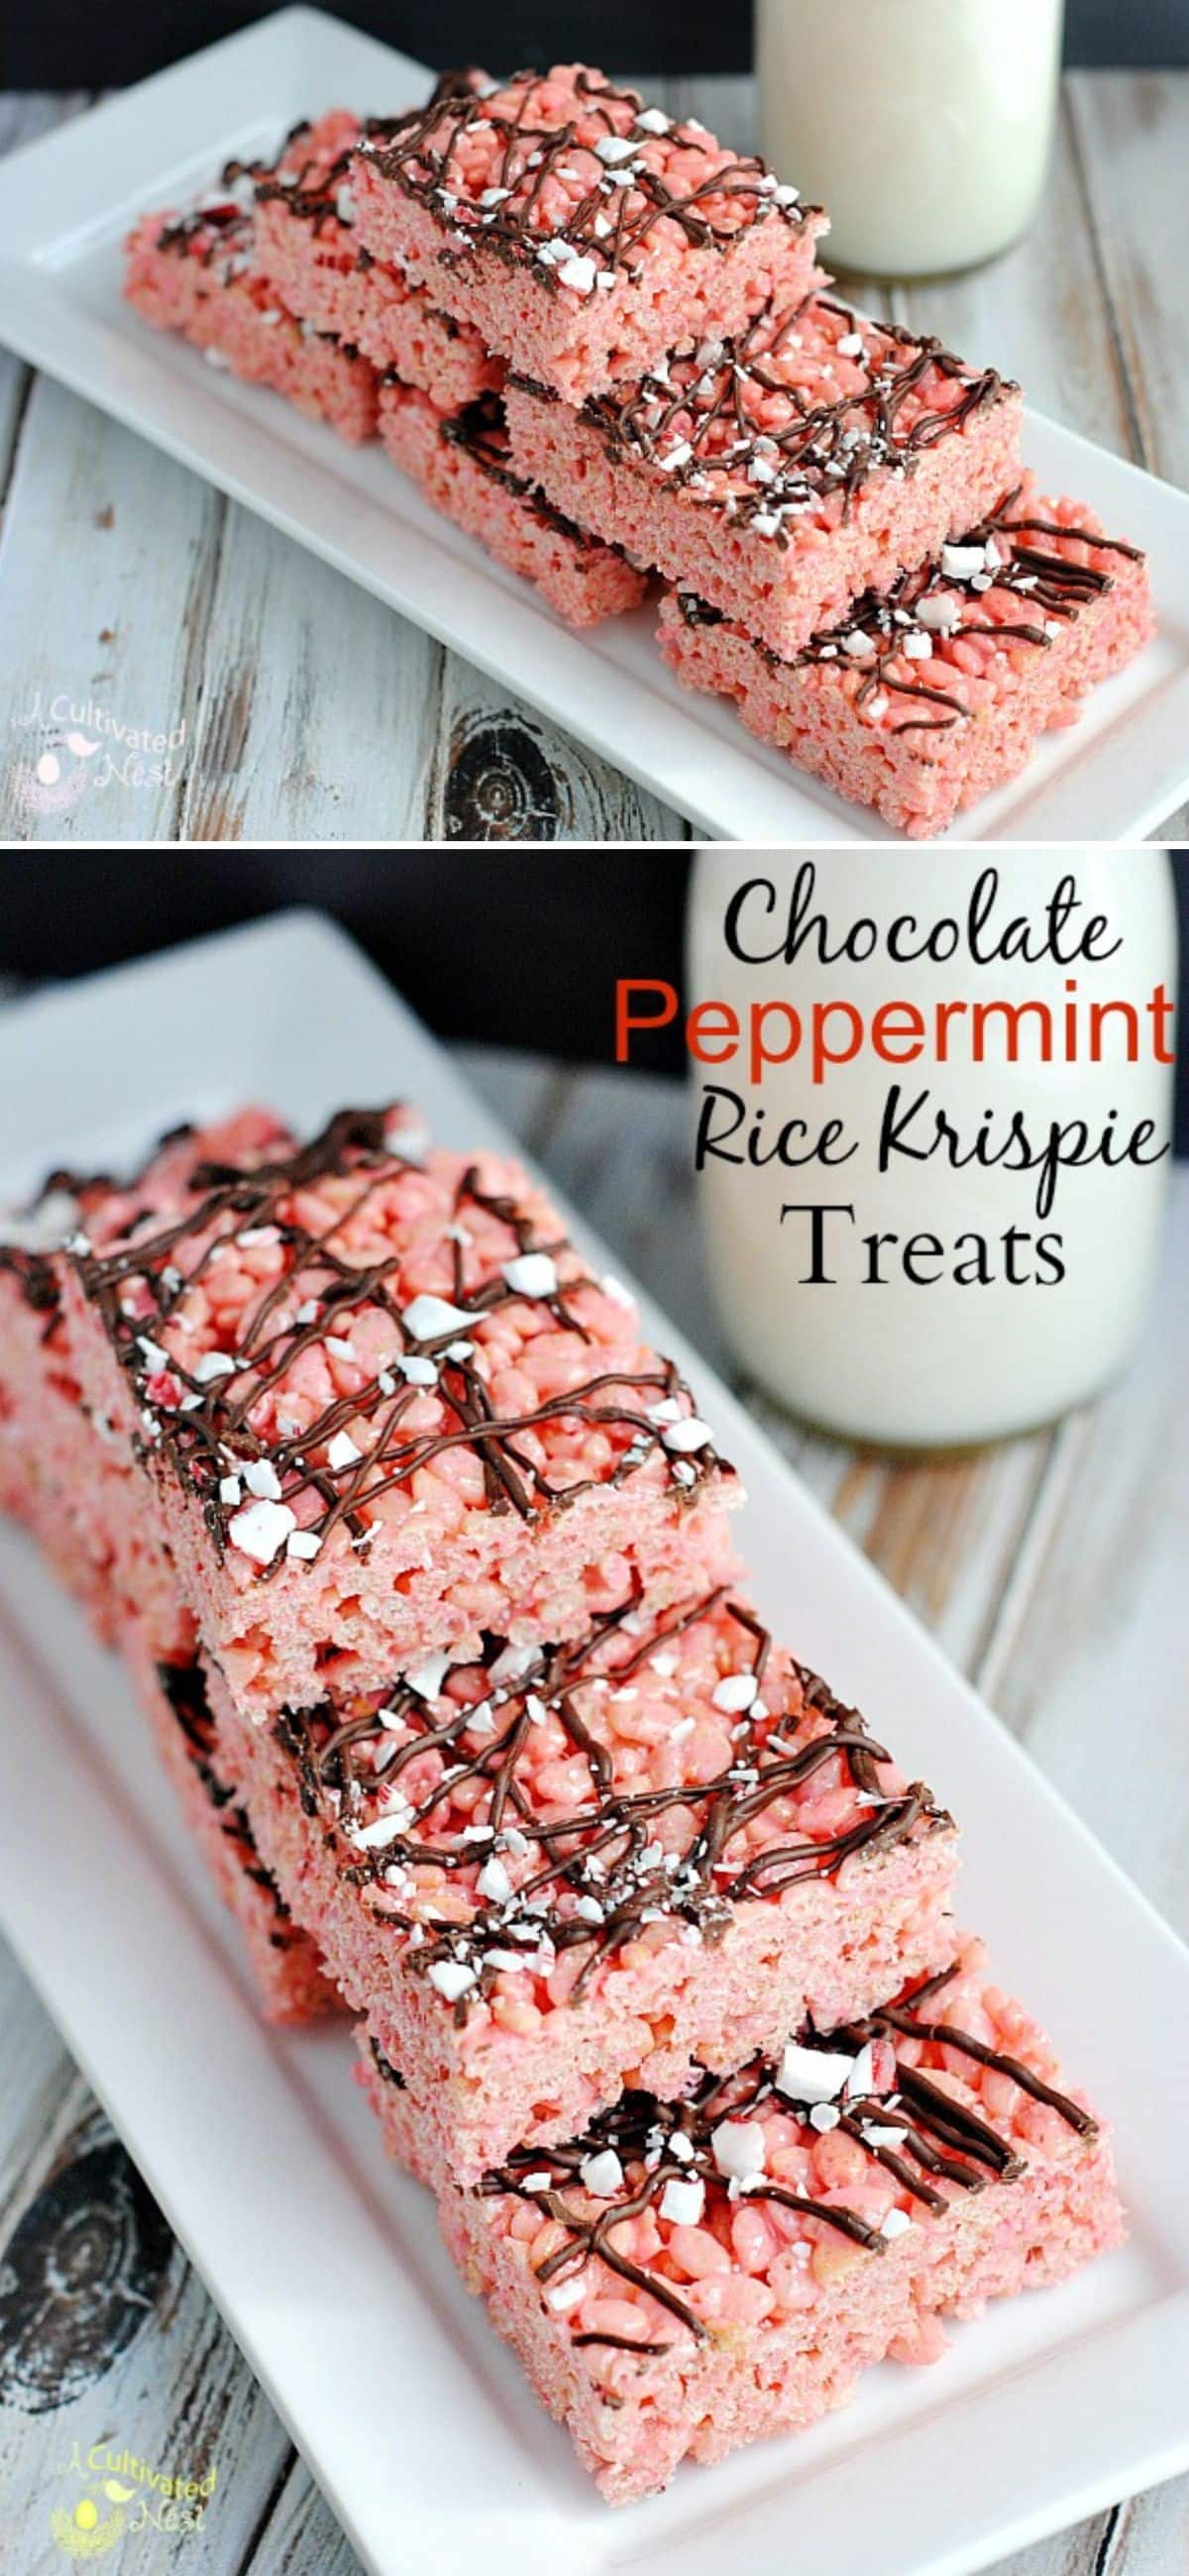 Peppermint and Chocolate Rice Krispie Treats